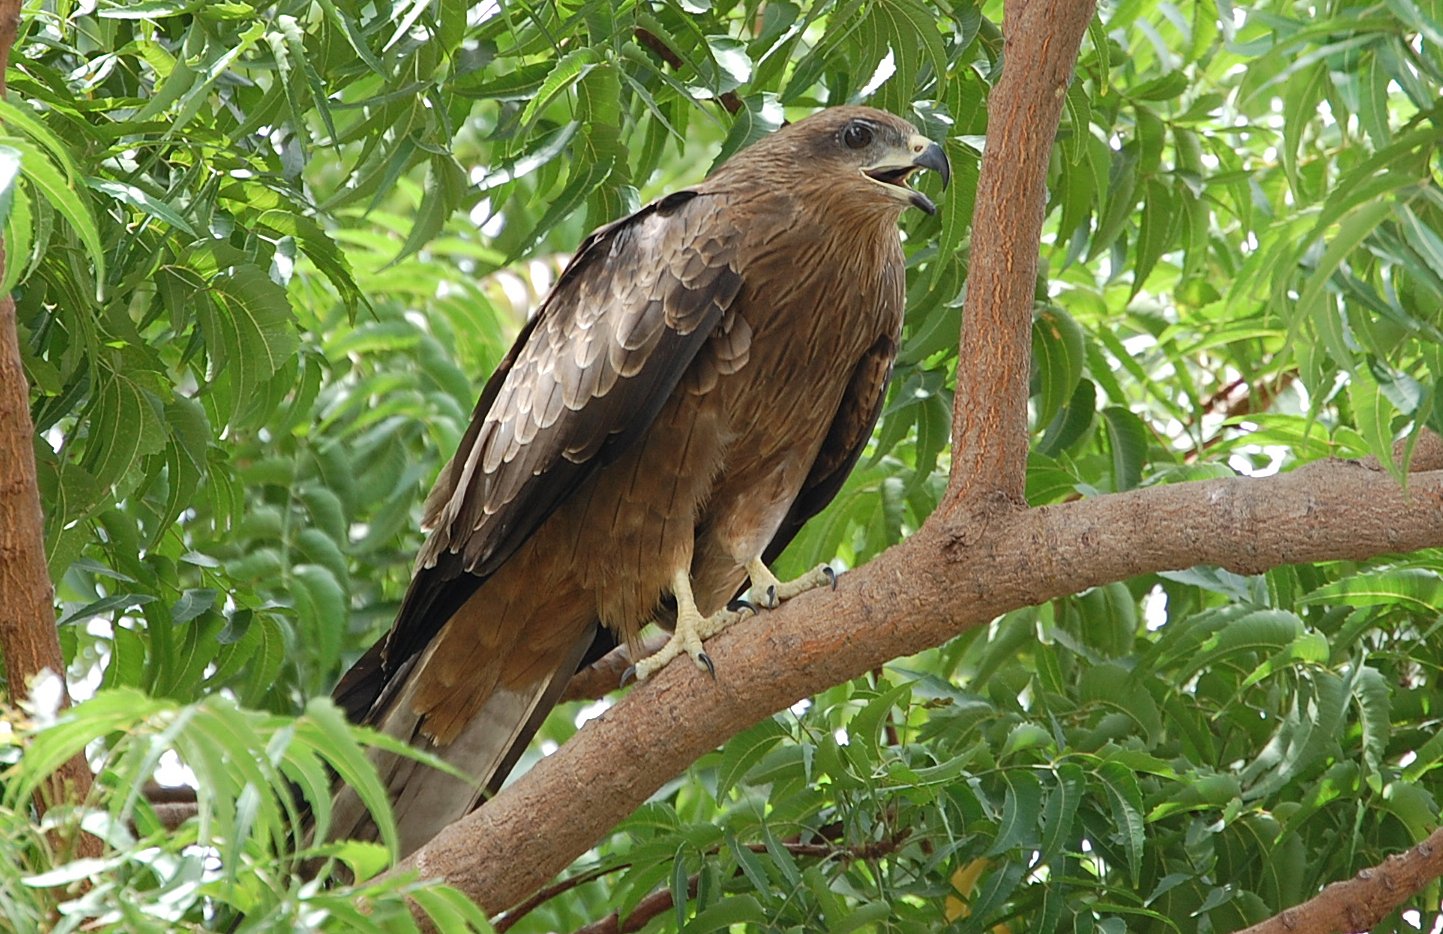 a hawk perched on a tree nch in the forest